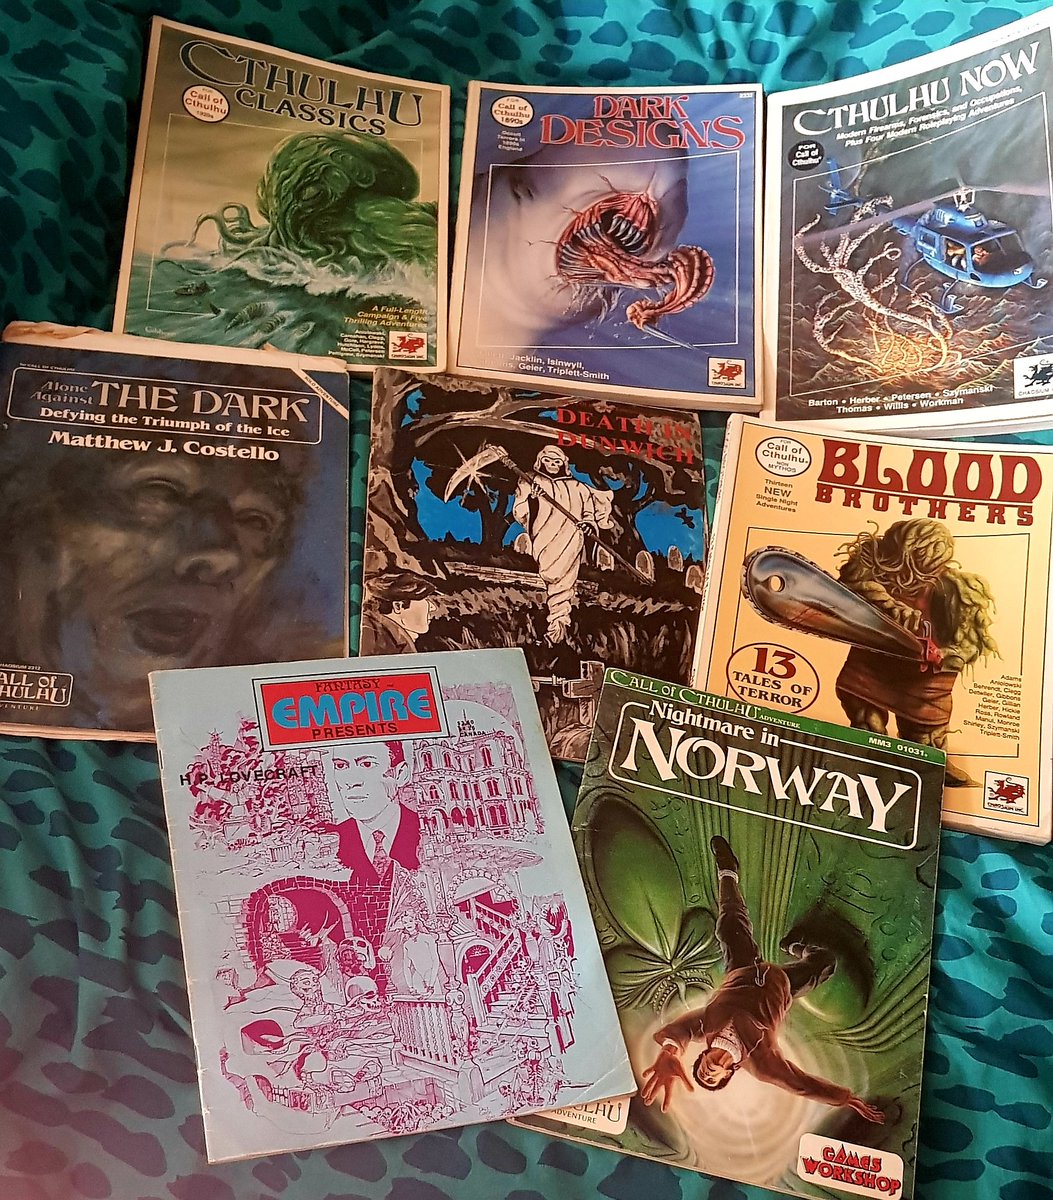 Some of my #CallOfCthulhu items. I have MANY more but can't put my hands on them right now.
#CoC